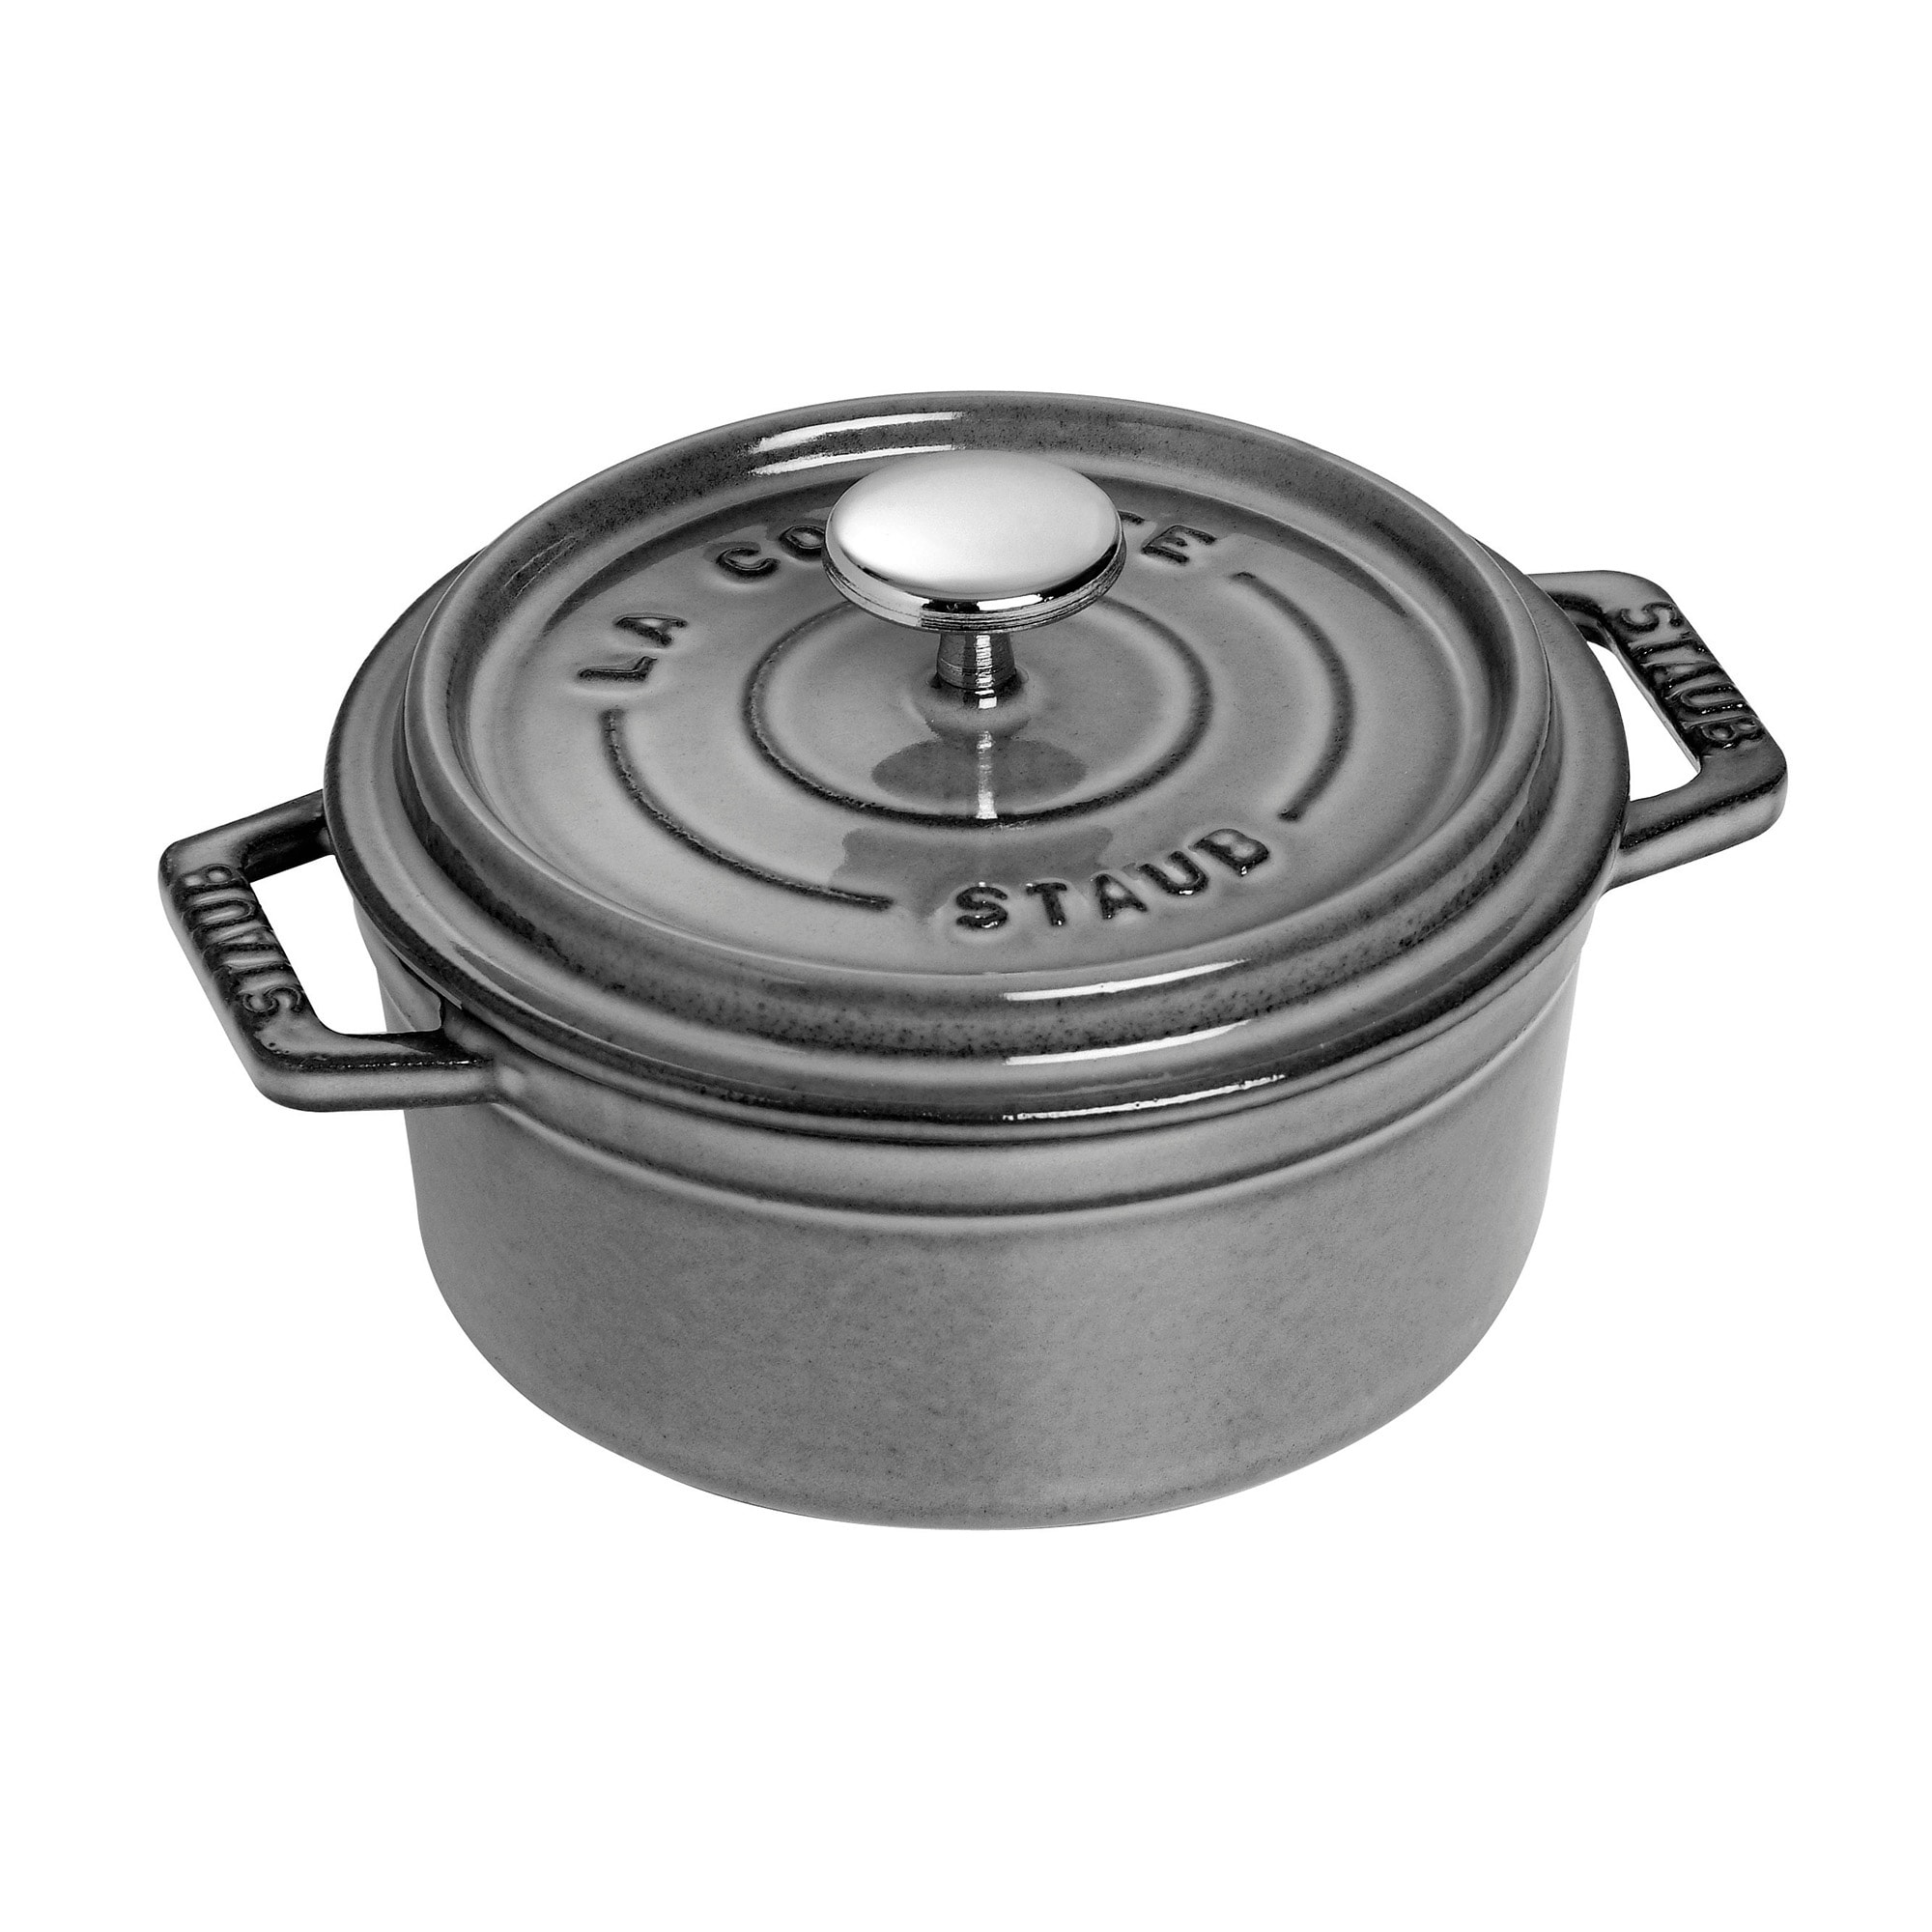 https://ak1.ostkcdn.com/images/products/is/images/direct/a9c77288d33fb2f6ade9e6494a1ea1705e89fbc2/Staub-Cast-Iron-0.5-qt-Round-Cocotte.jpg